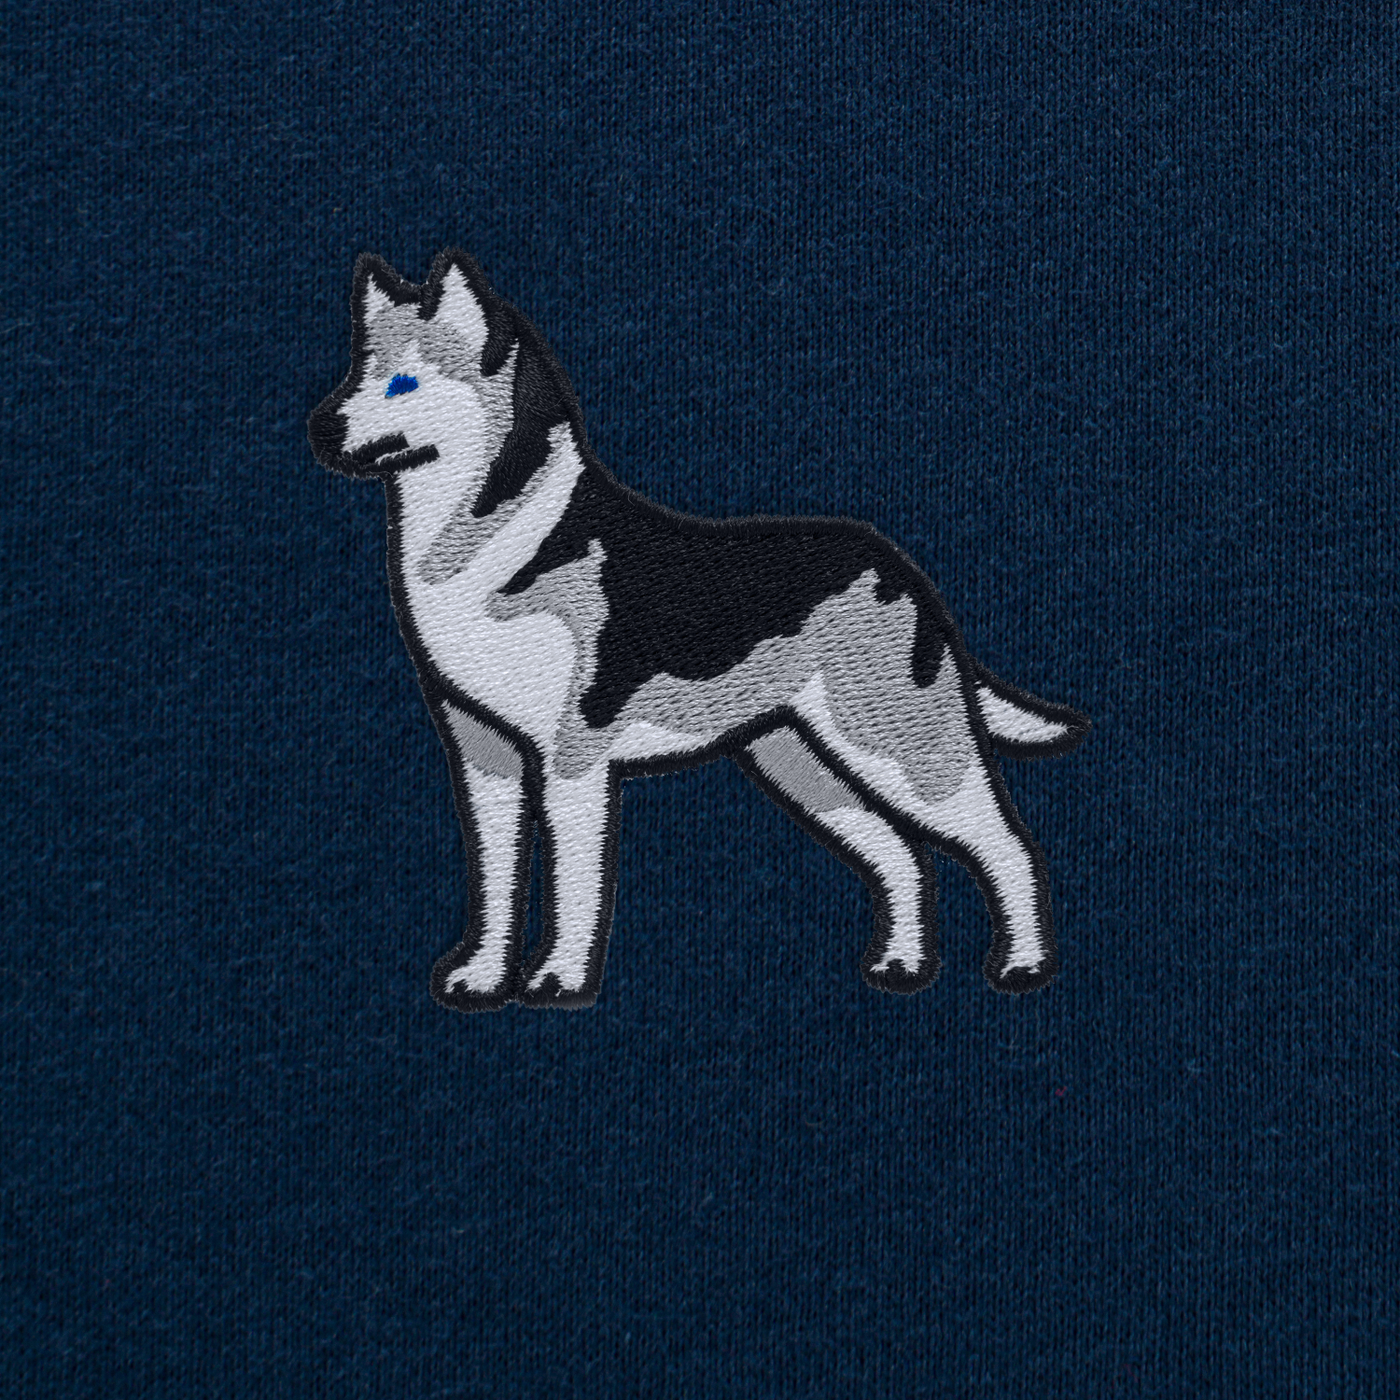 Bobby's Planet Women's Embroidered Siberian Husky T-Shirt from Paws Dog Cat Animals Collection in Navy Color#color_navy